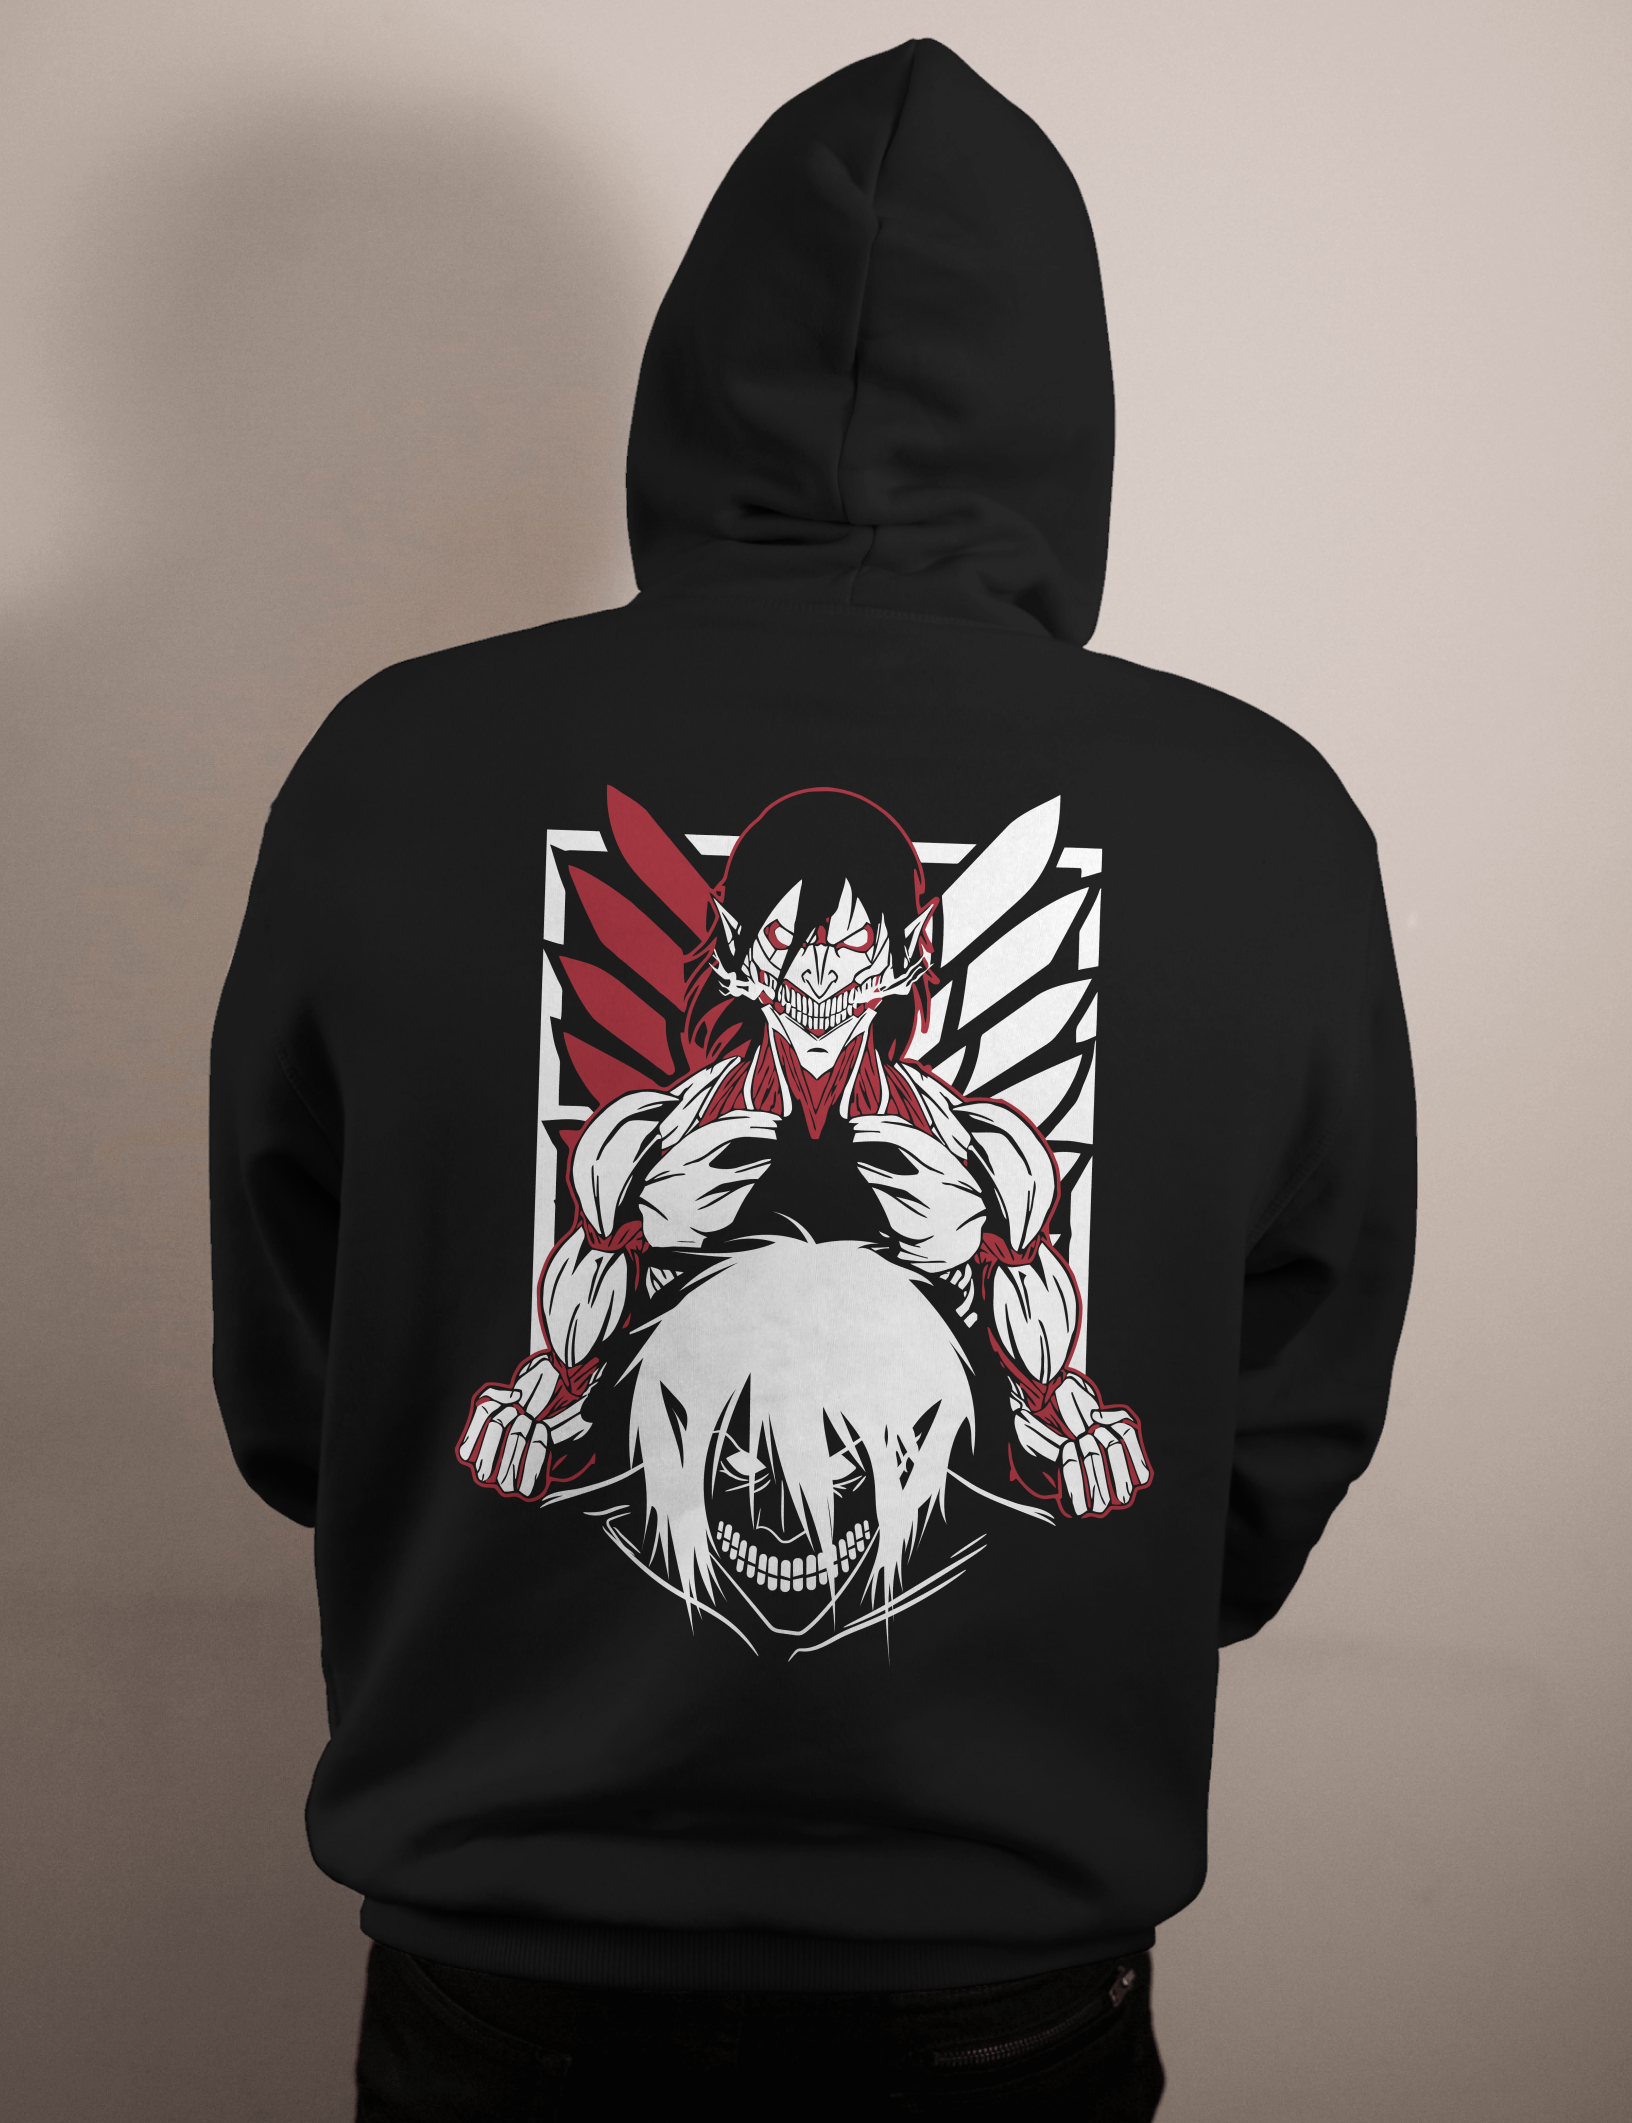 shop and buy attack on titan anime clothing erens titan hoodie